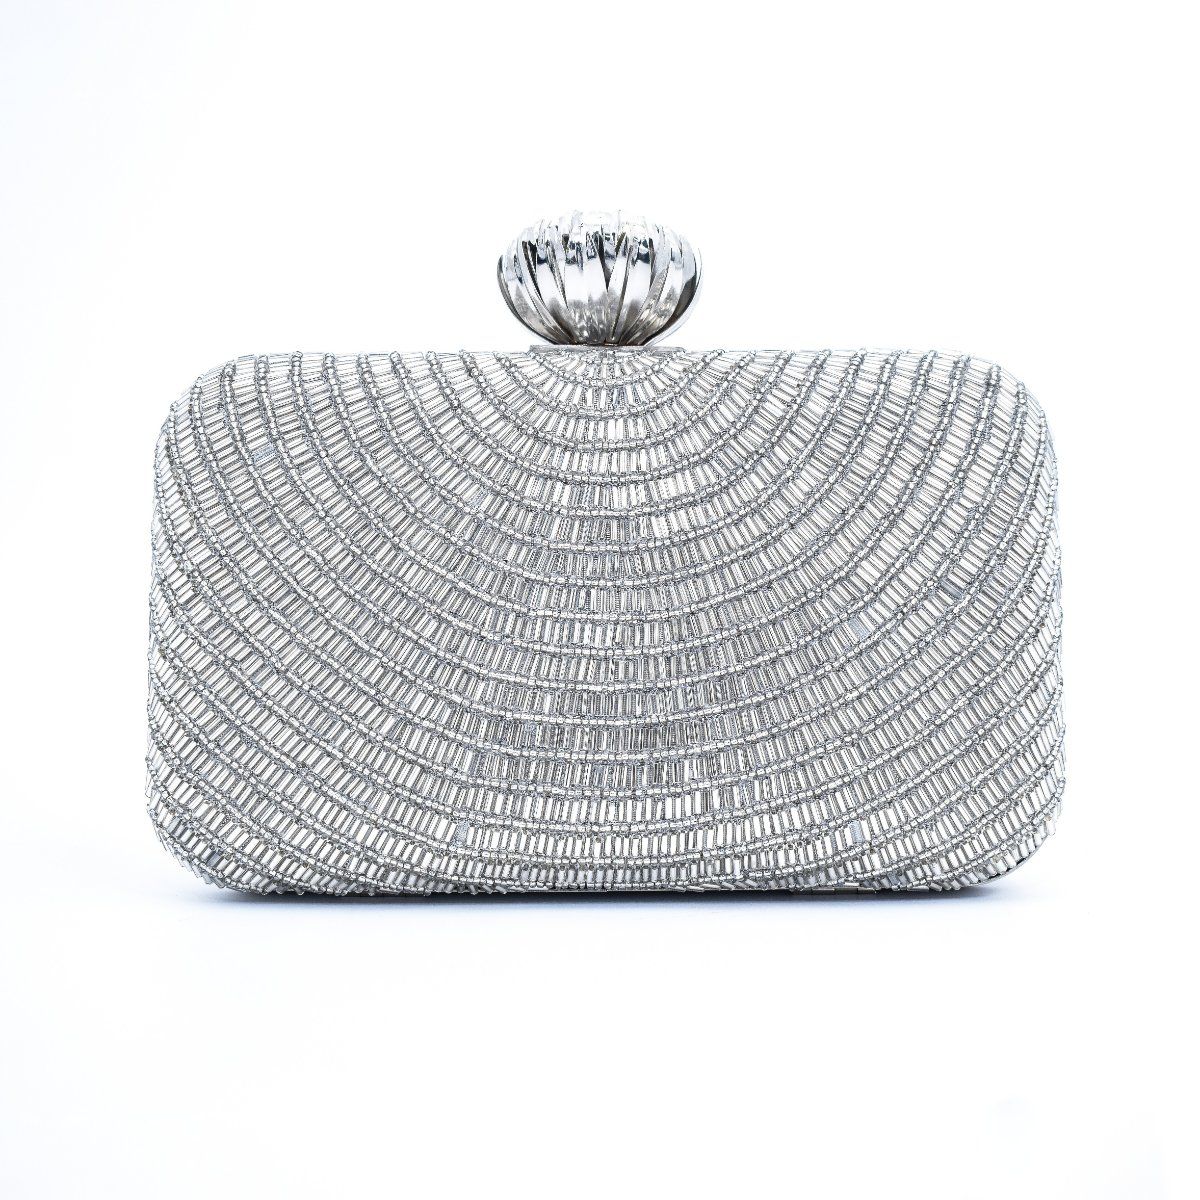 Odette Shiny Silver Flattened Stone Textured Clutch Sling Bag Buy Odette  Shiny Silver Flattened Stone Textured Clutch Sling Bag Online at Best Price  in India  Nykaa